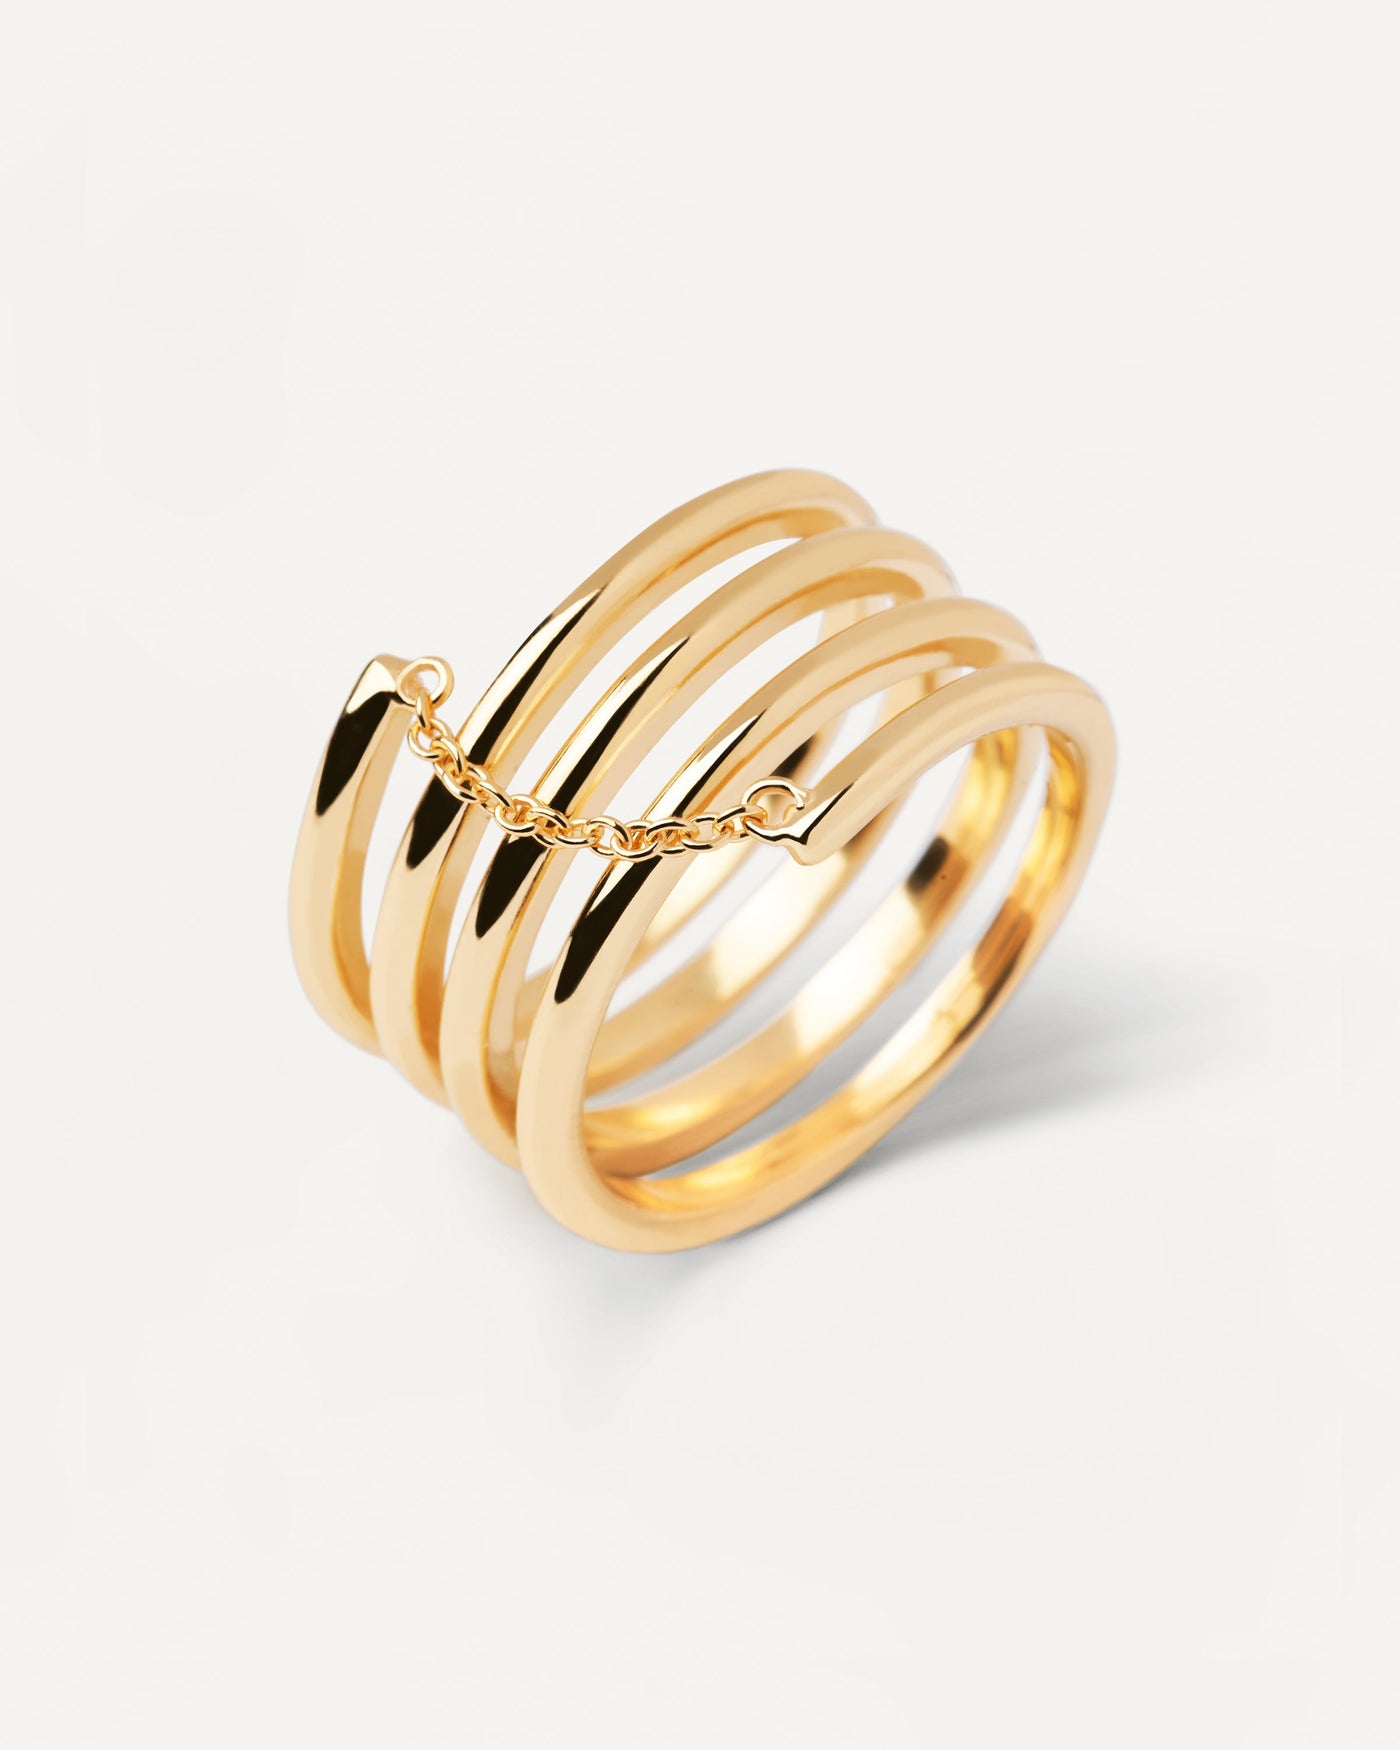 2023 Selection | Spring Ring. Endless spiral ring with dainty chain in gold-plated silver. Get the latest arrival from PDPAOLA. Place your order safely and get this Best Seller. Free Shipping.